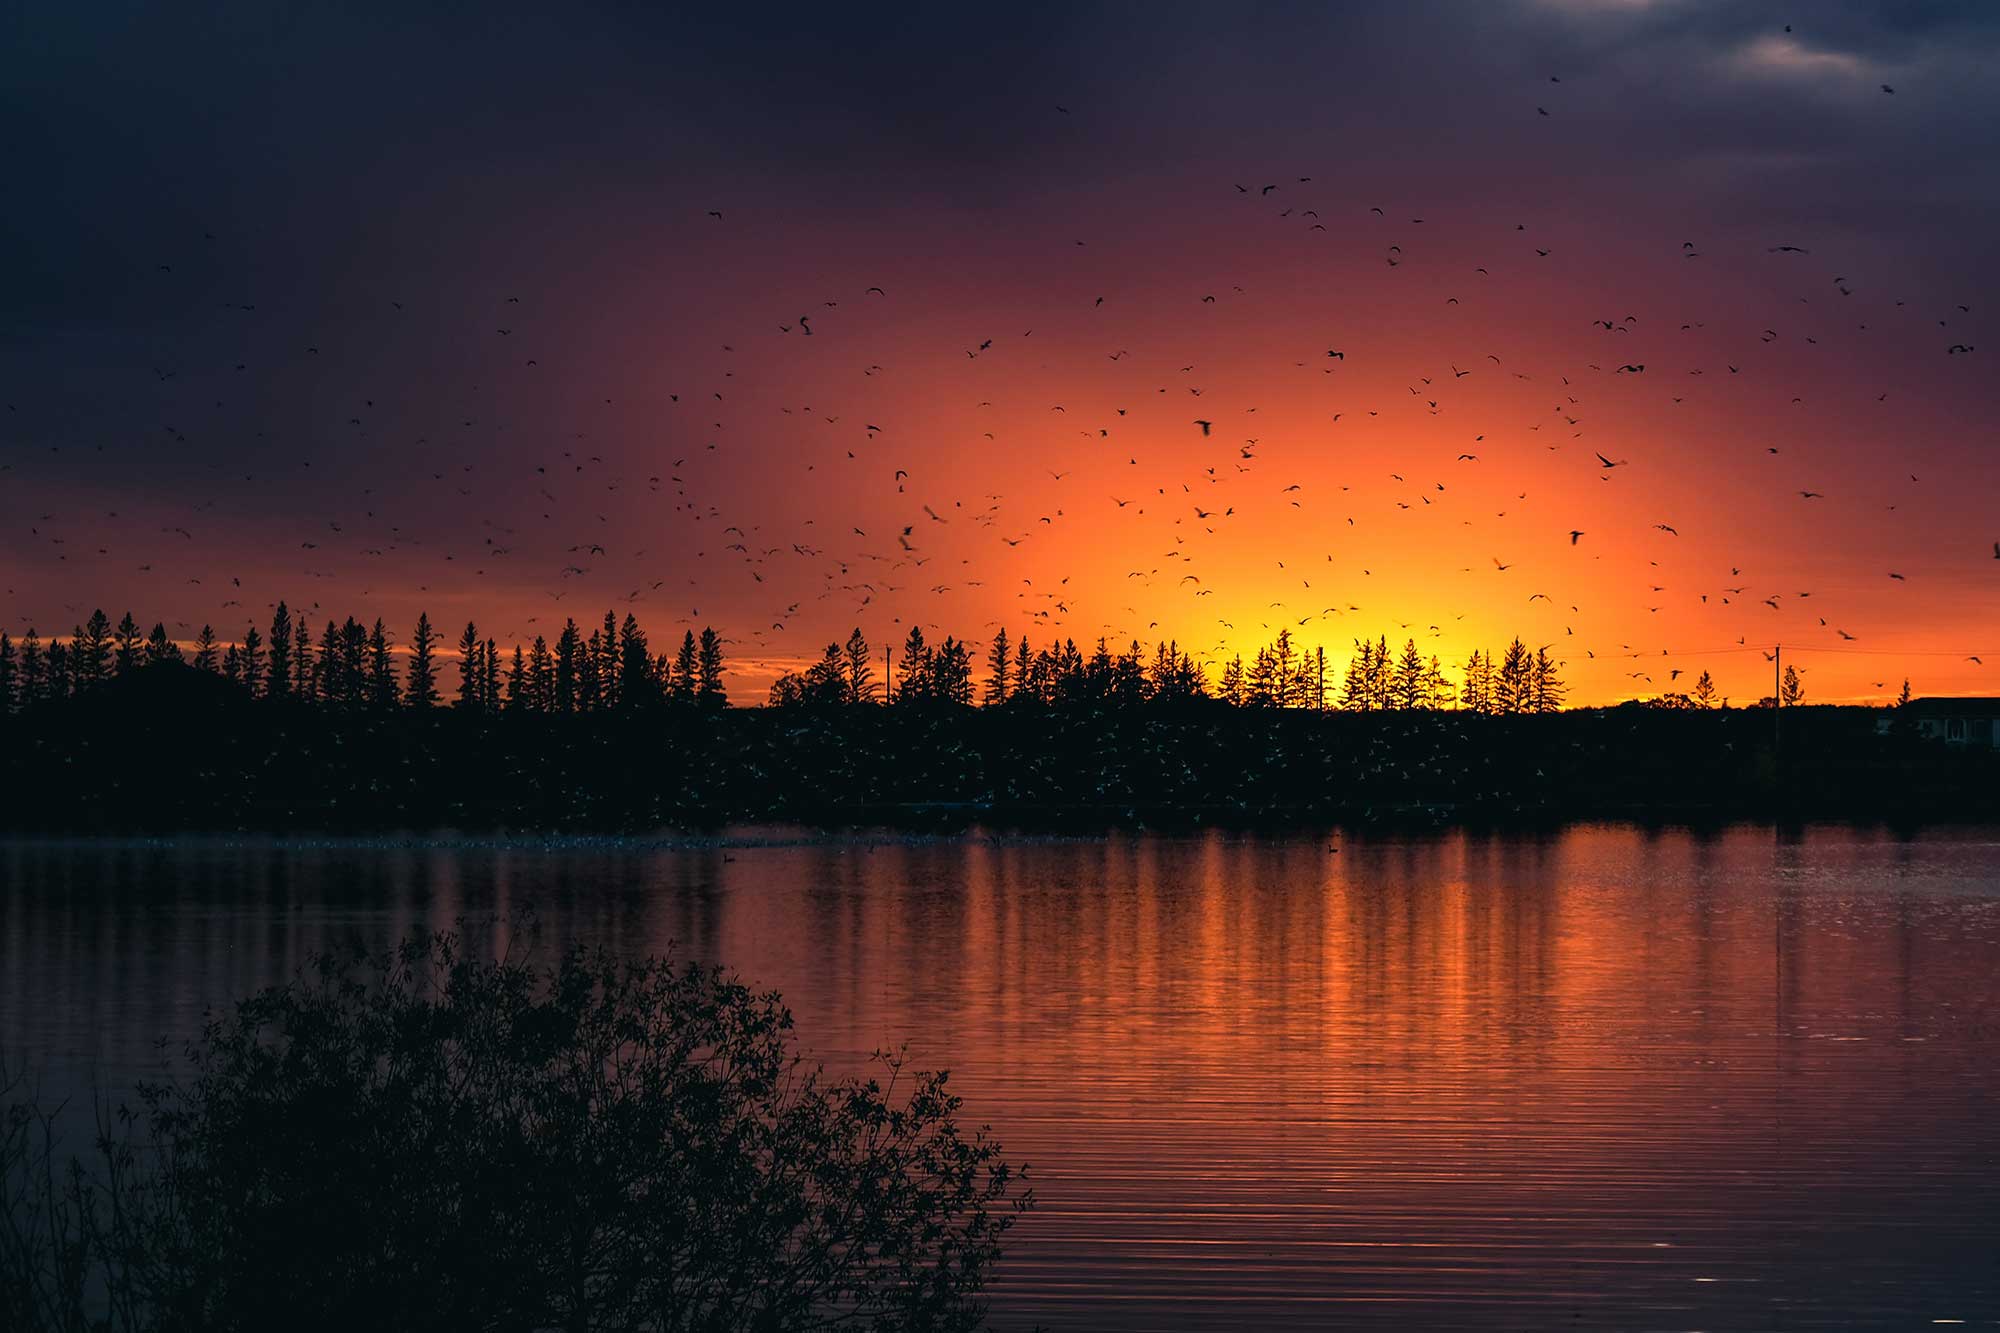 Birds flying over water at sunset at FortWhyte Alive in Winnipeg.